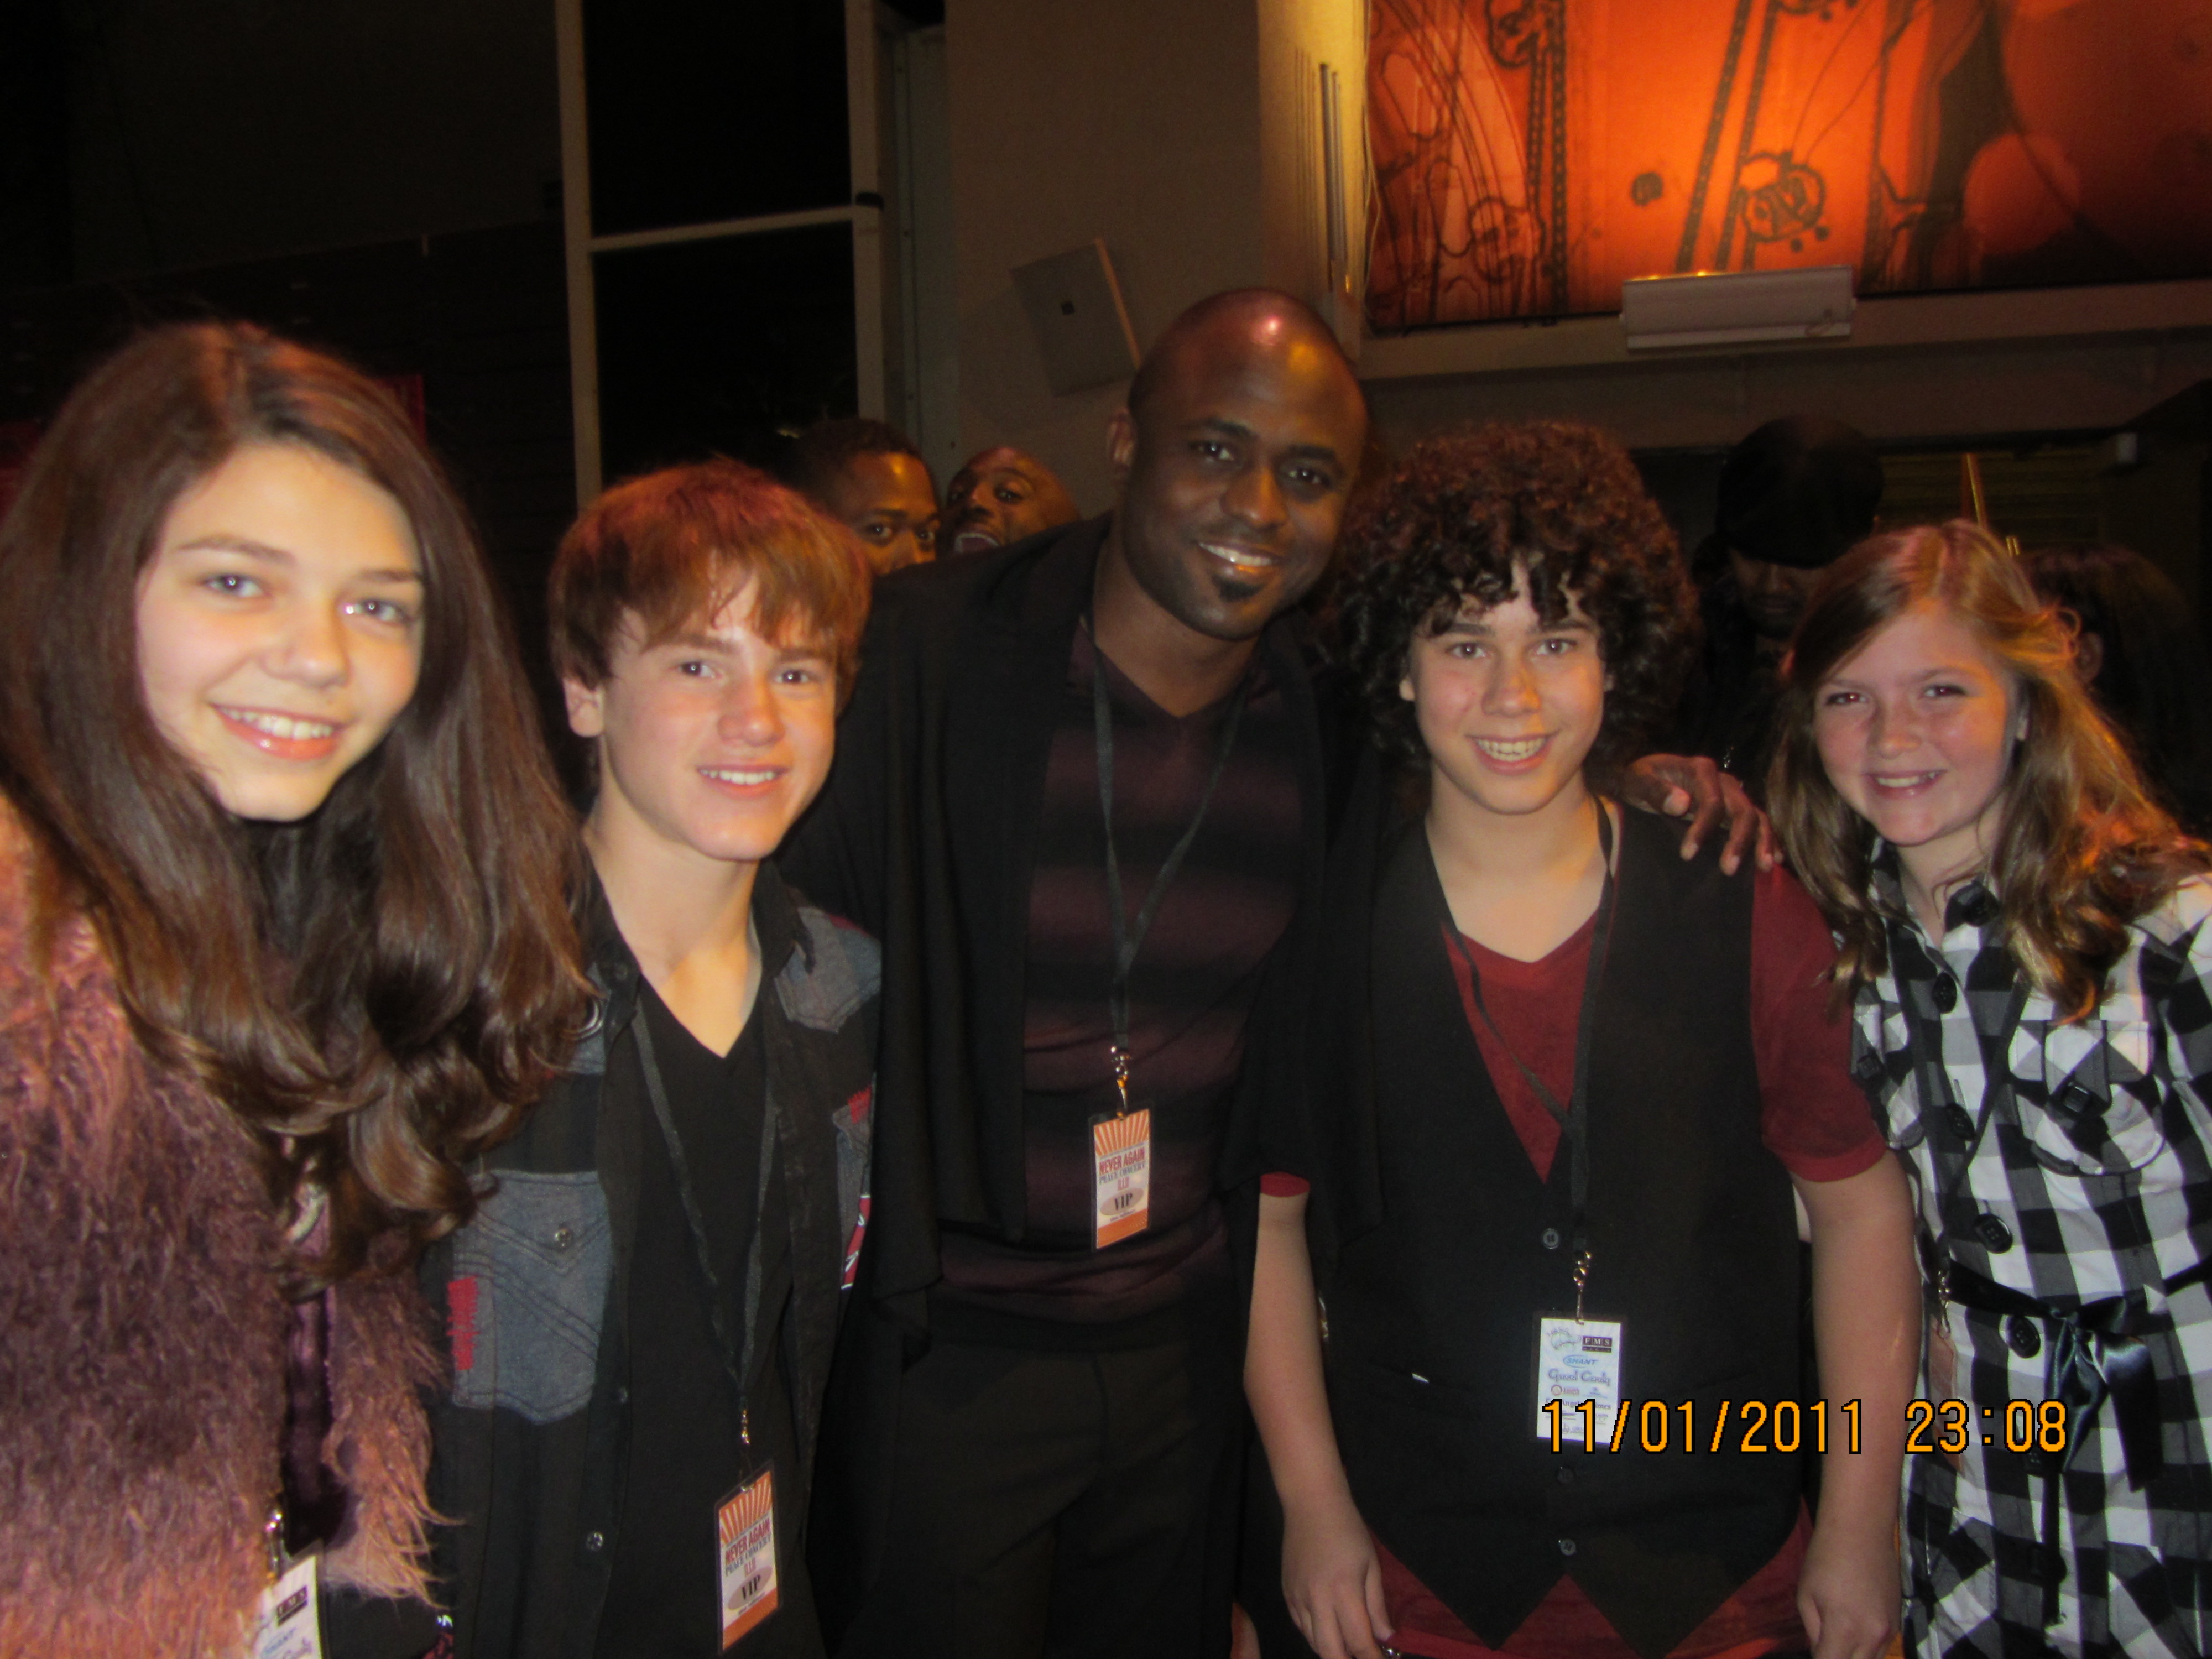 Bryce Hitchcock, Justin Tinucci, Wayne Brady, sam lant and abigail hargrove at Gibson Amphitheater at Universal Studios CityWalk attendng Artists for Peace Tribute to Stevie Wonder.